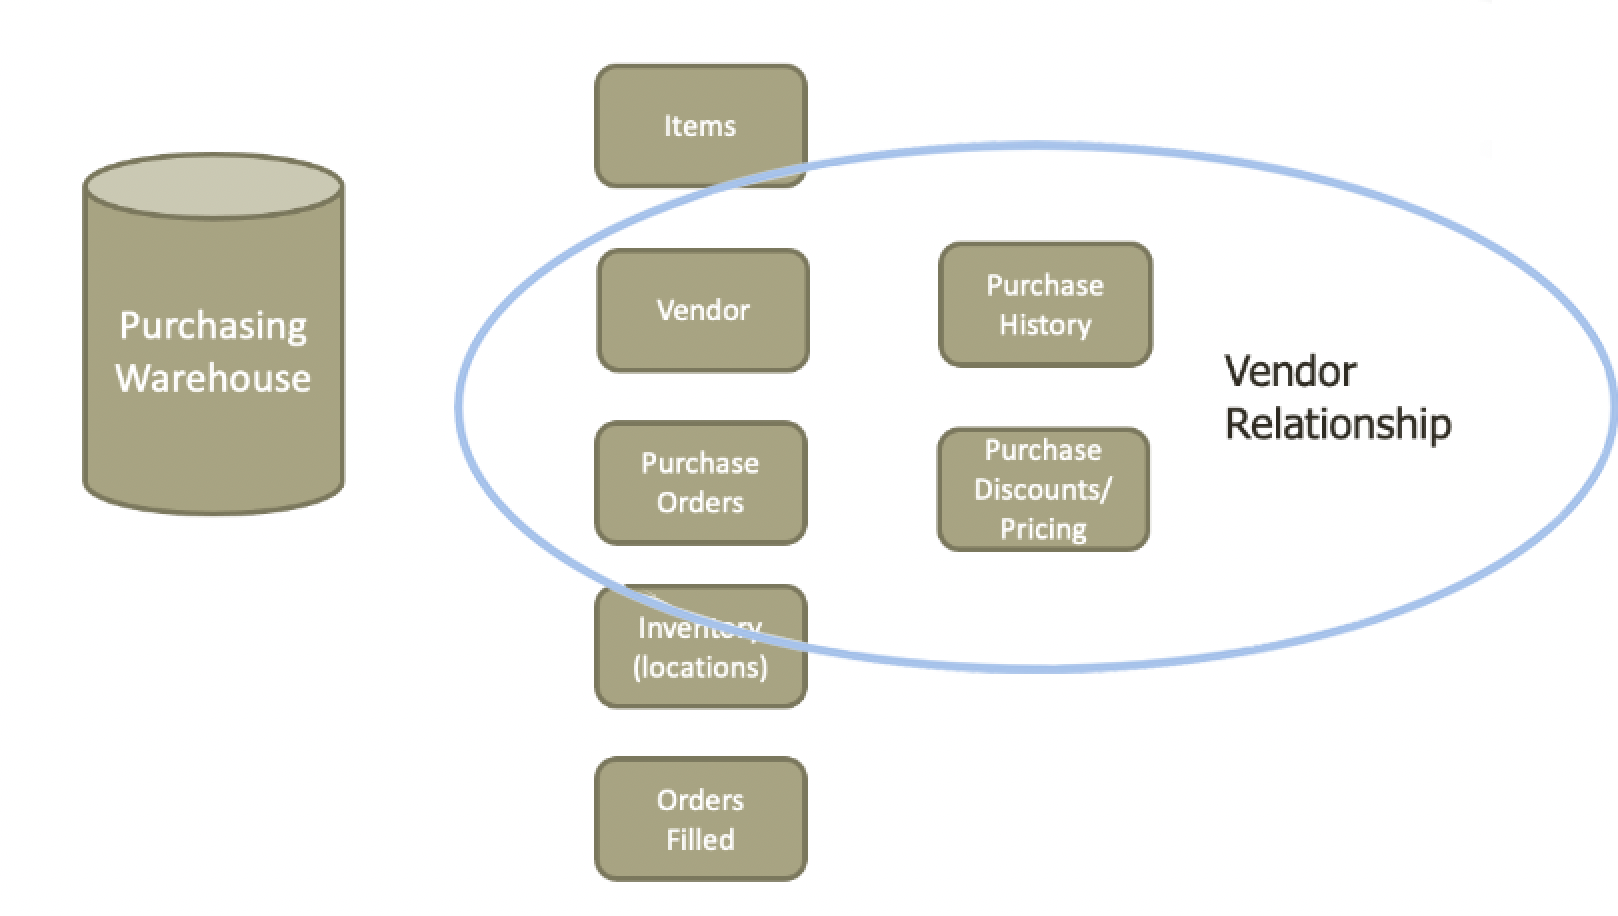 Purchasing Warehouse elements: items, vendor, purchase orders, inventory (locations), orders filied, purchase history, purchhase discounts / pricing